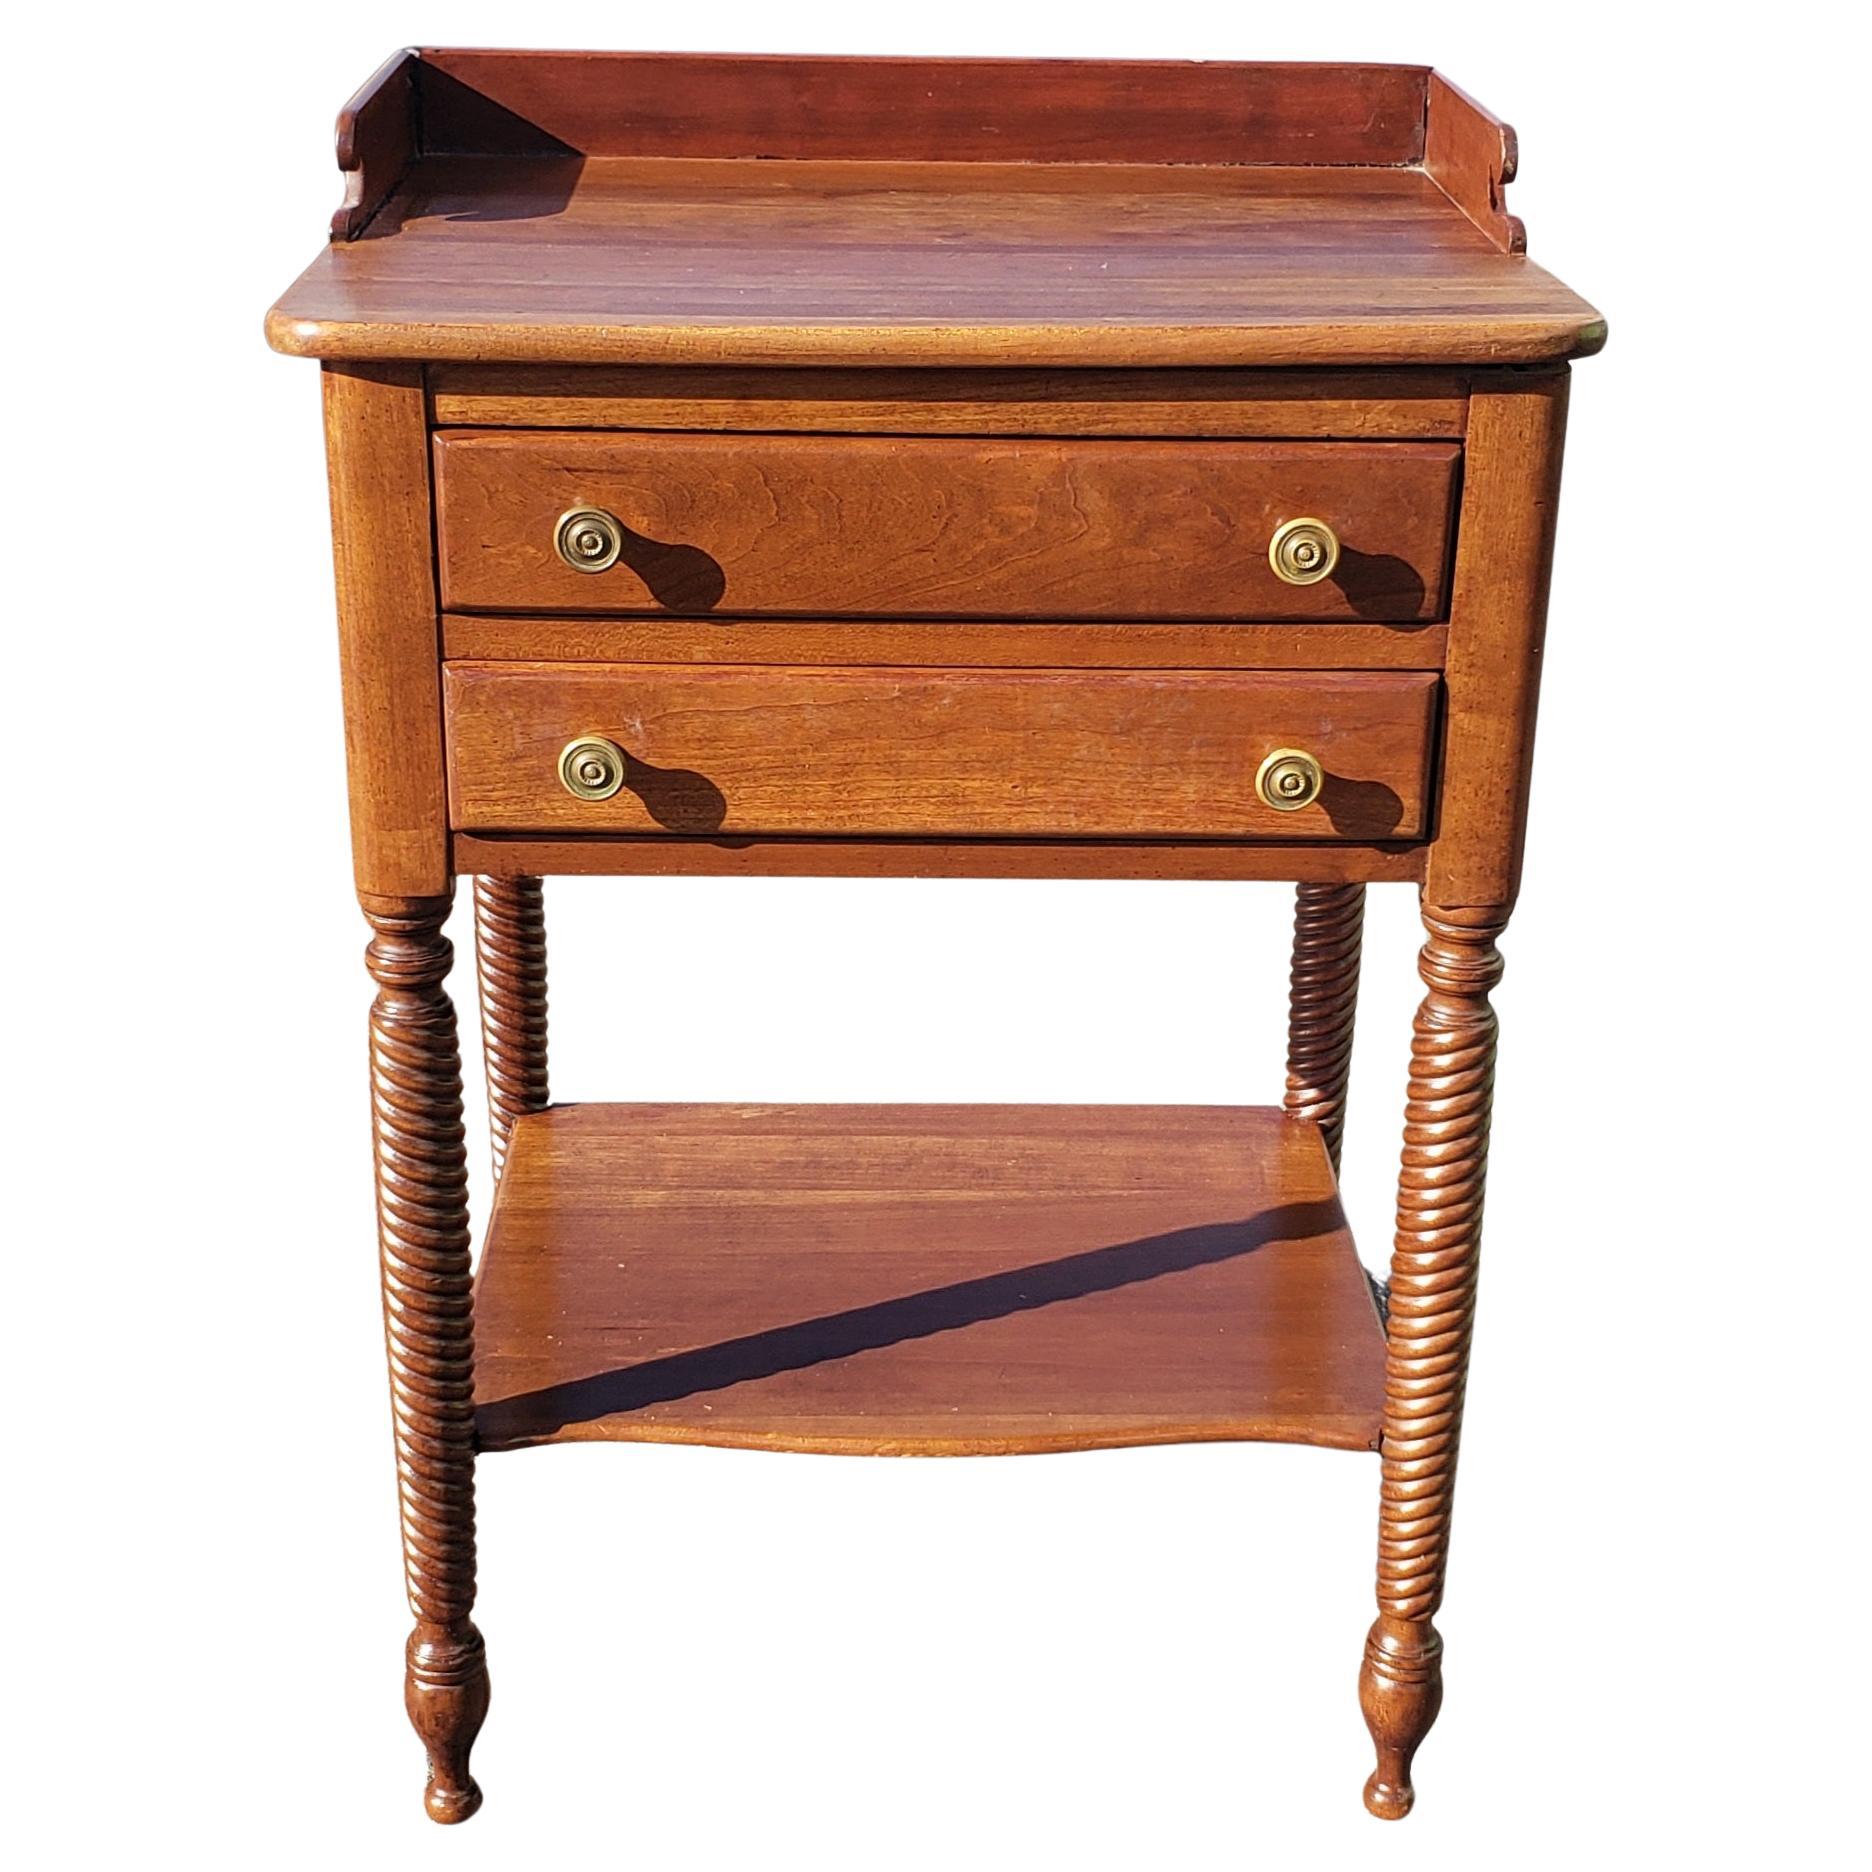 A vintage side table from the Willett Furniture Company in solid Kentucky cherry. The table has rope turned legs, round brass pulls, two drawers and a gallery. Beneath there is a shaped shelf between the four legs. Willett produced extremely popular